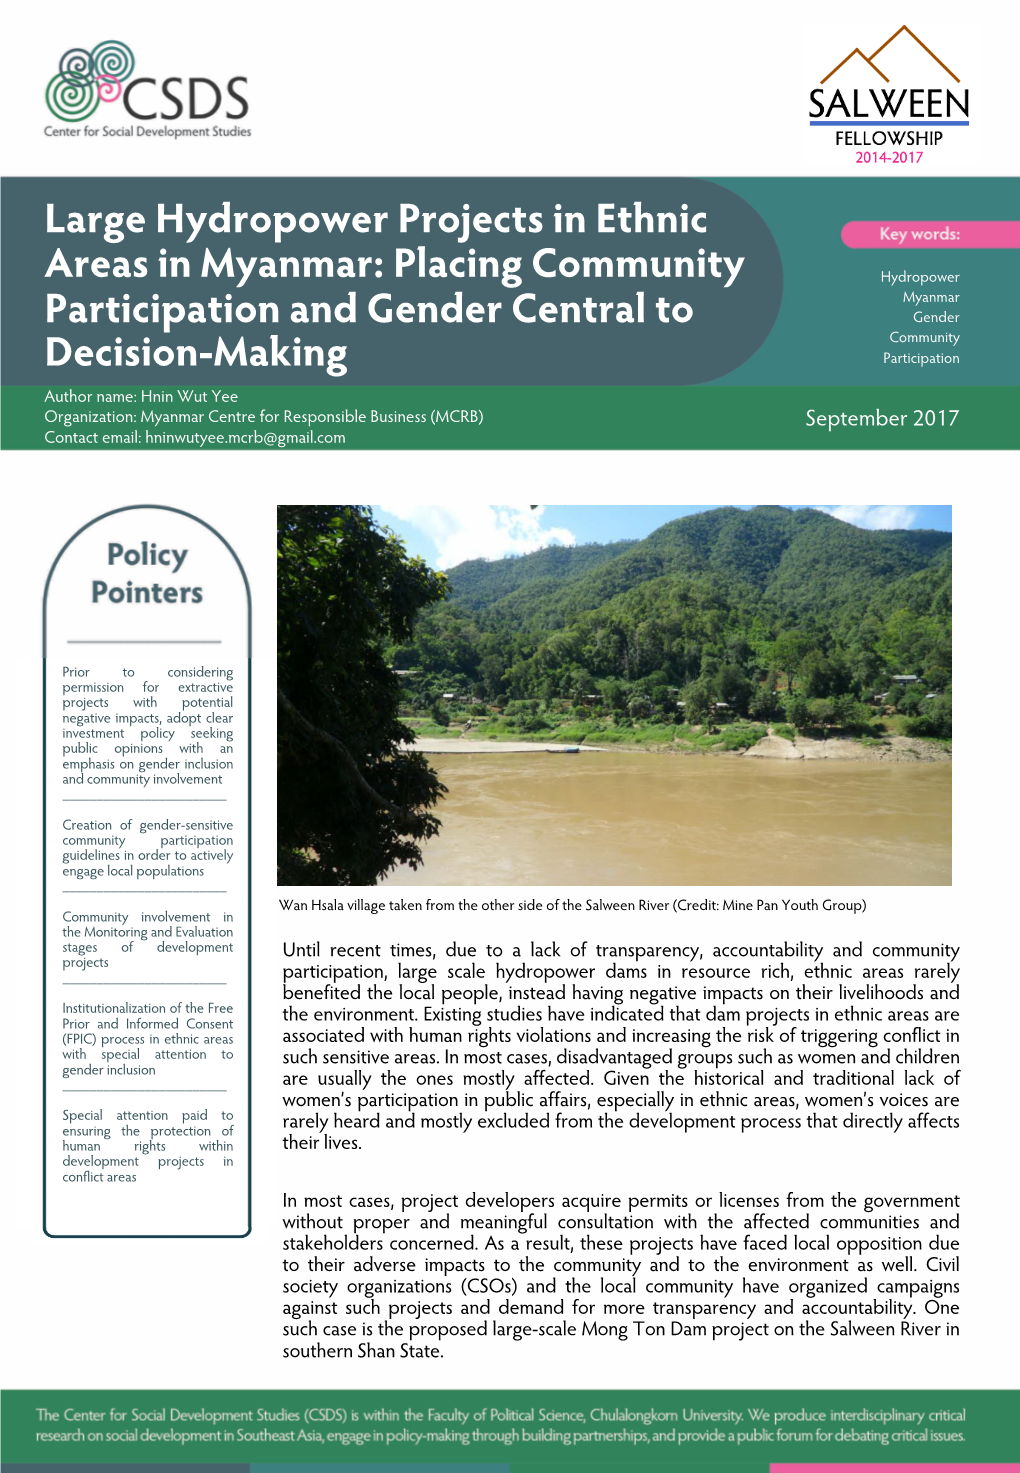 Large Hydropower Projects in Ethnic Areas in Myanmar